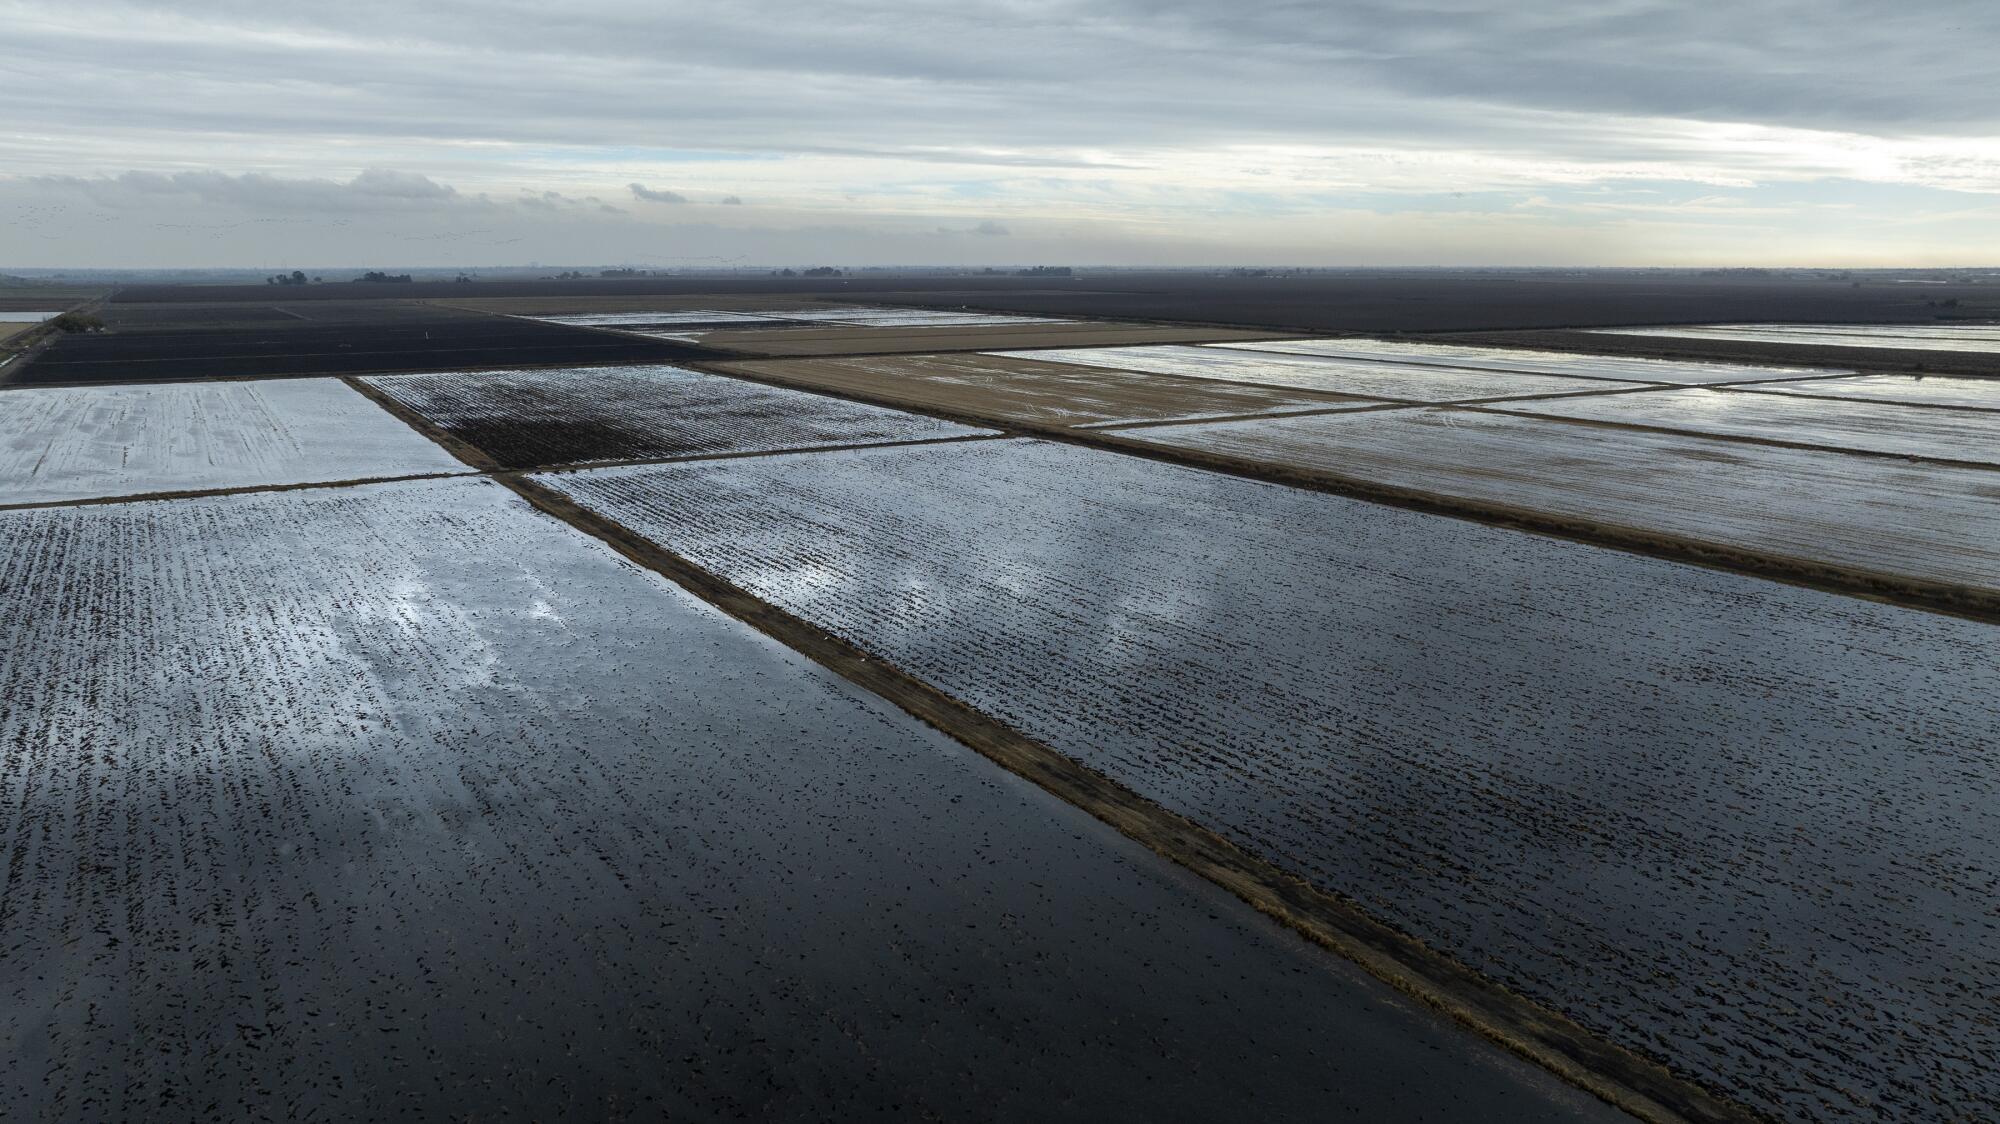 Flooded rice fields along the San Joaquin River in Stockton.